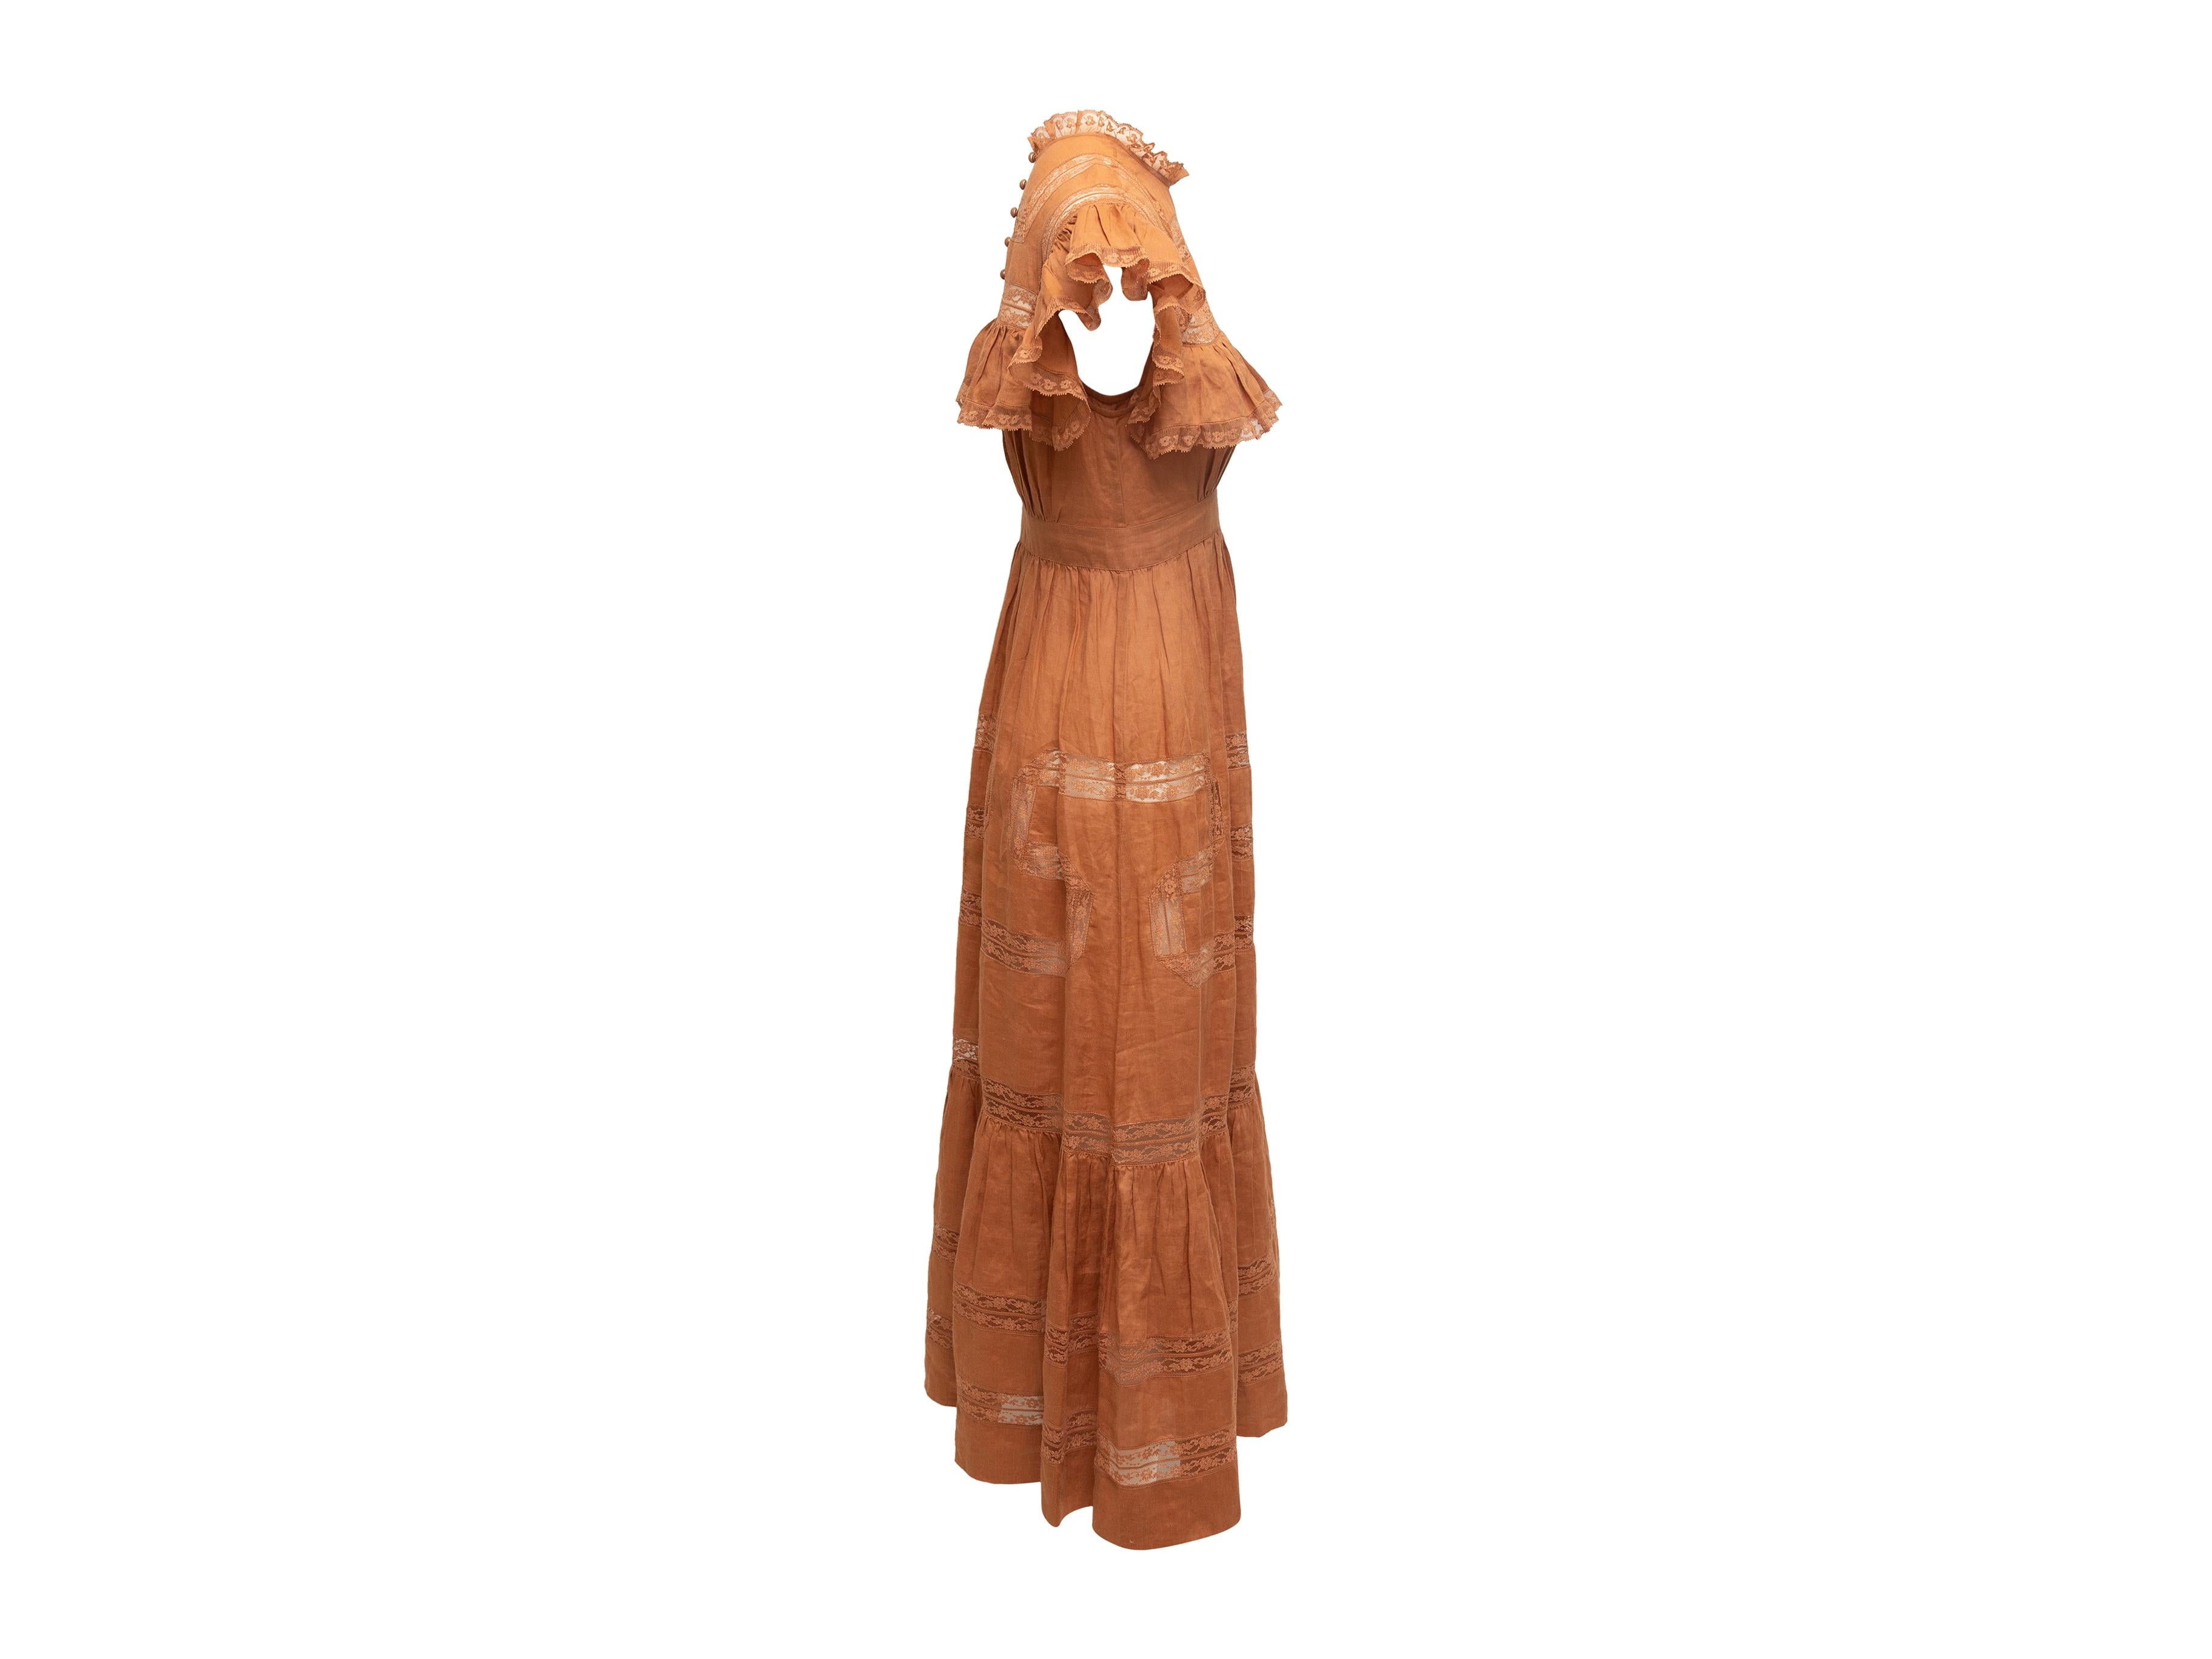 Product details: Tan lace-trimmed maxi prairie dress by Doen. Crew neck. Short sleeves. Buttons at nape. Zip closure at side. 30